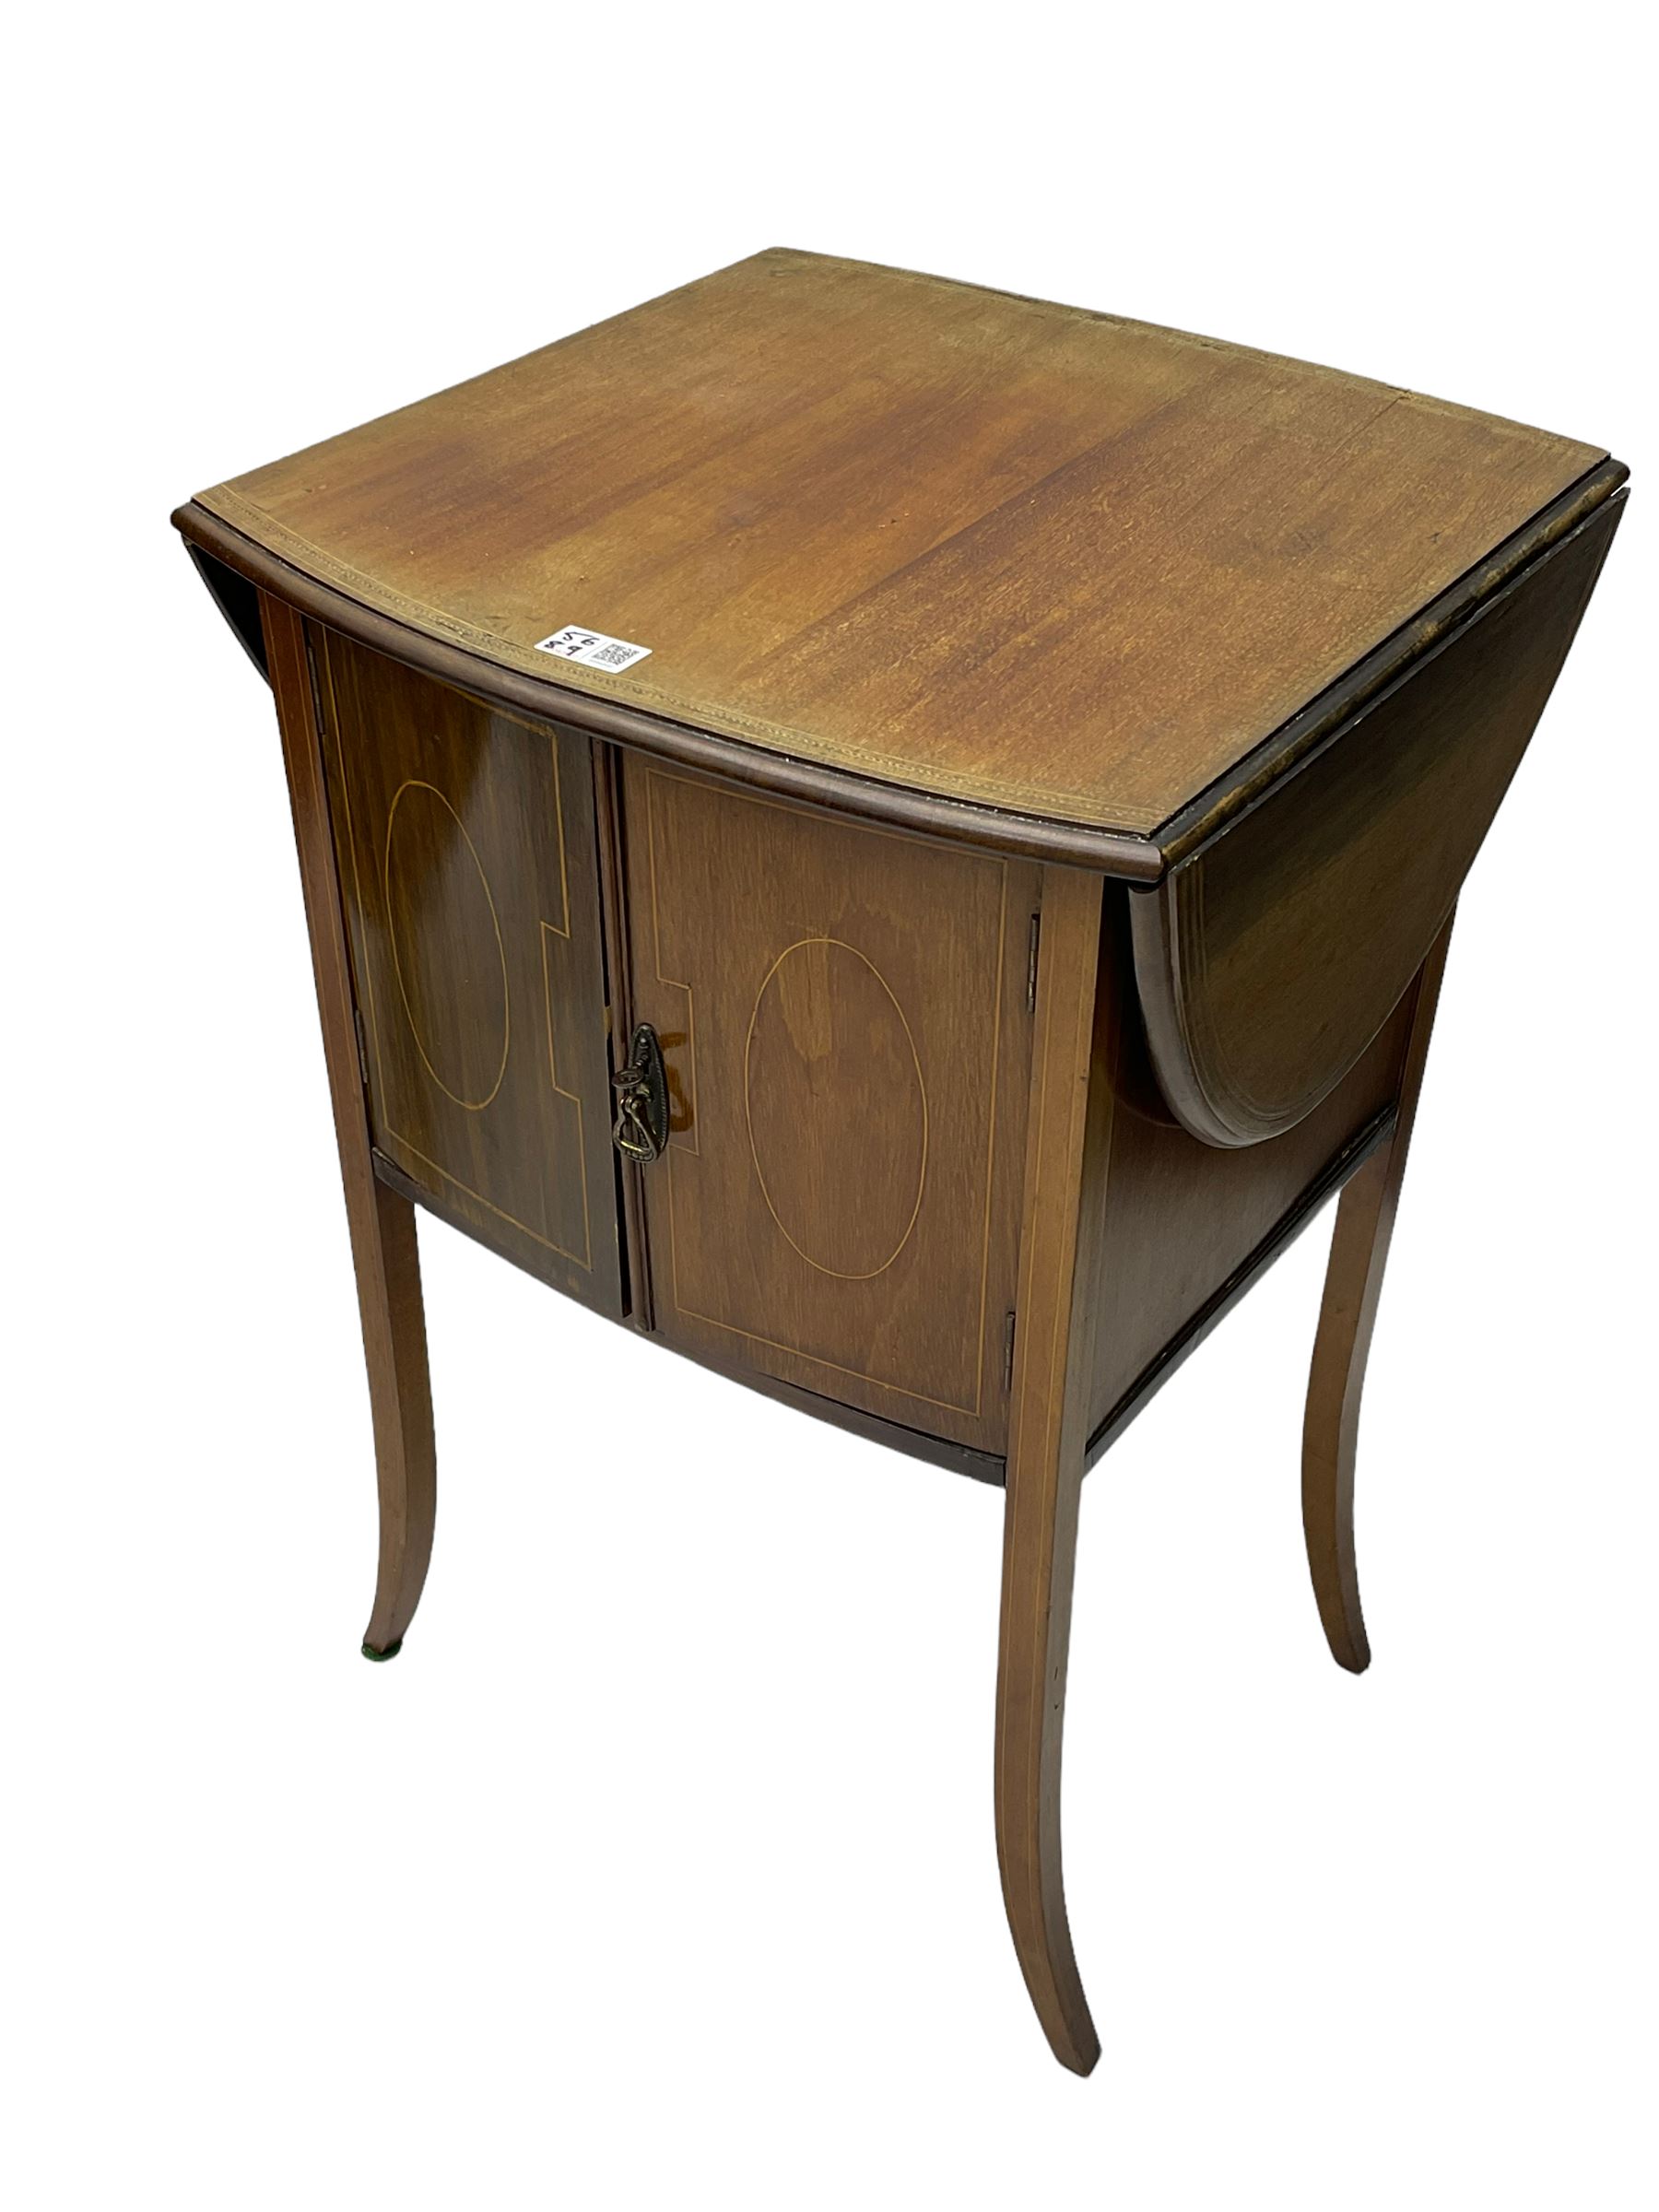 20th century mahogany two door cupboard/music cabinet and an early 20th century inlaid drop leaf cab - Image 2 of 3